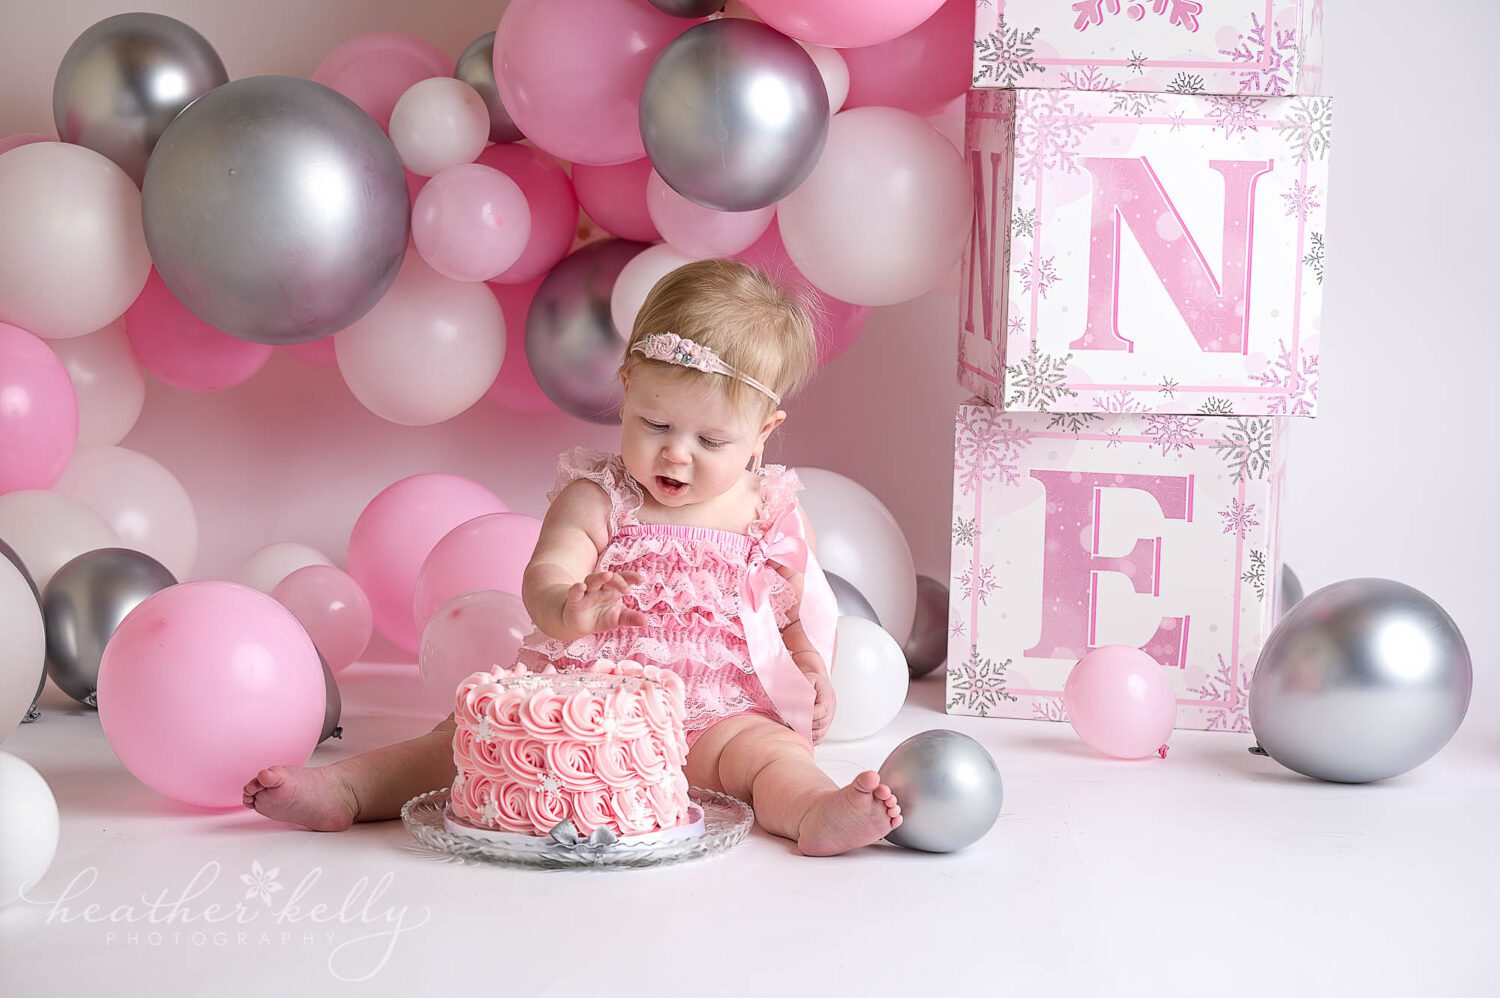 a one year old girl in pink reaching out towards a cake to celebrate her first birthday in sandy hook ct. 